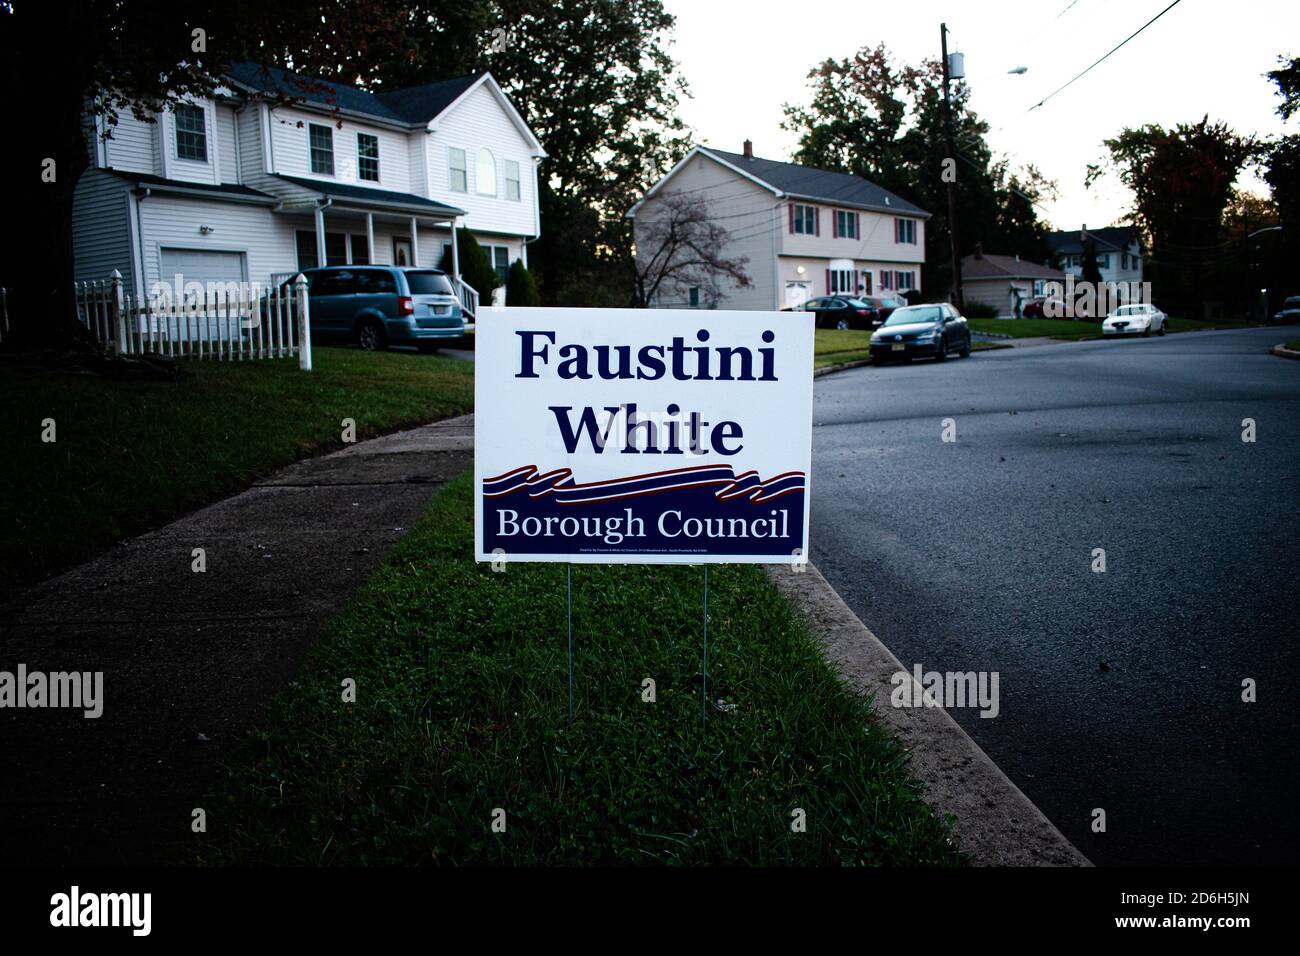 Faustini and White for Borough Council Election Sign in a New Jersey Suburb Stock Photo